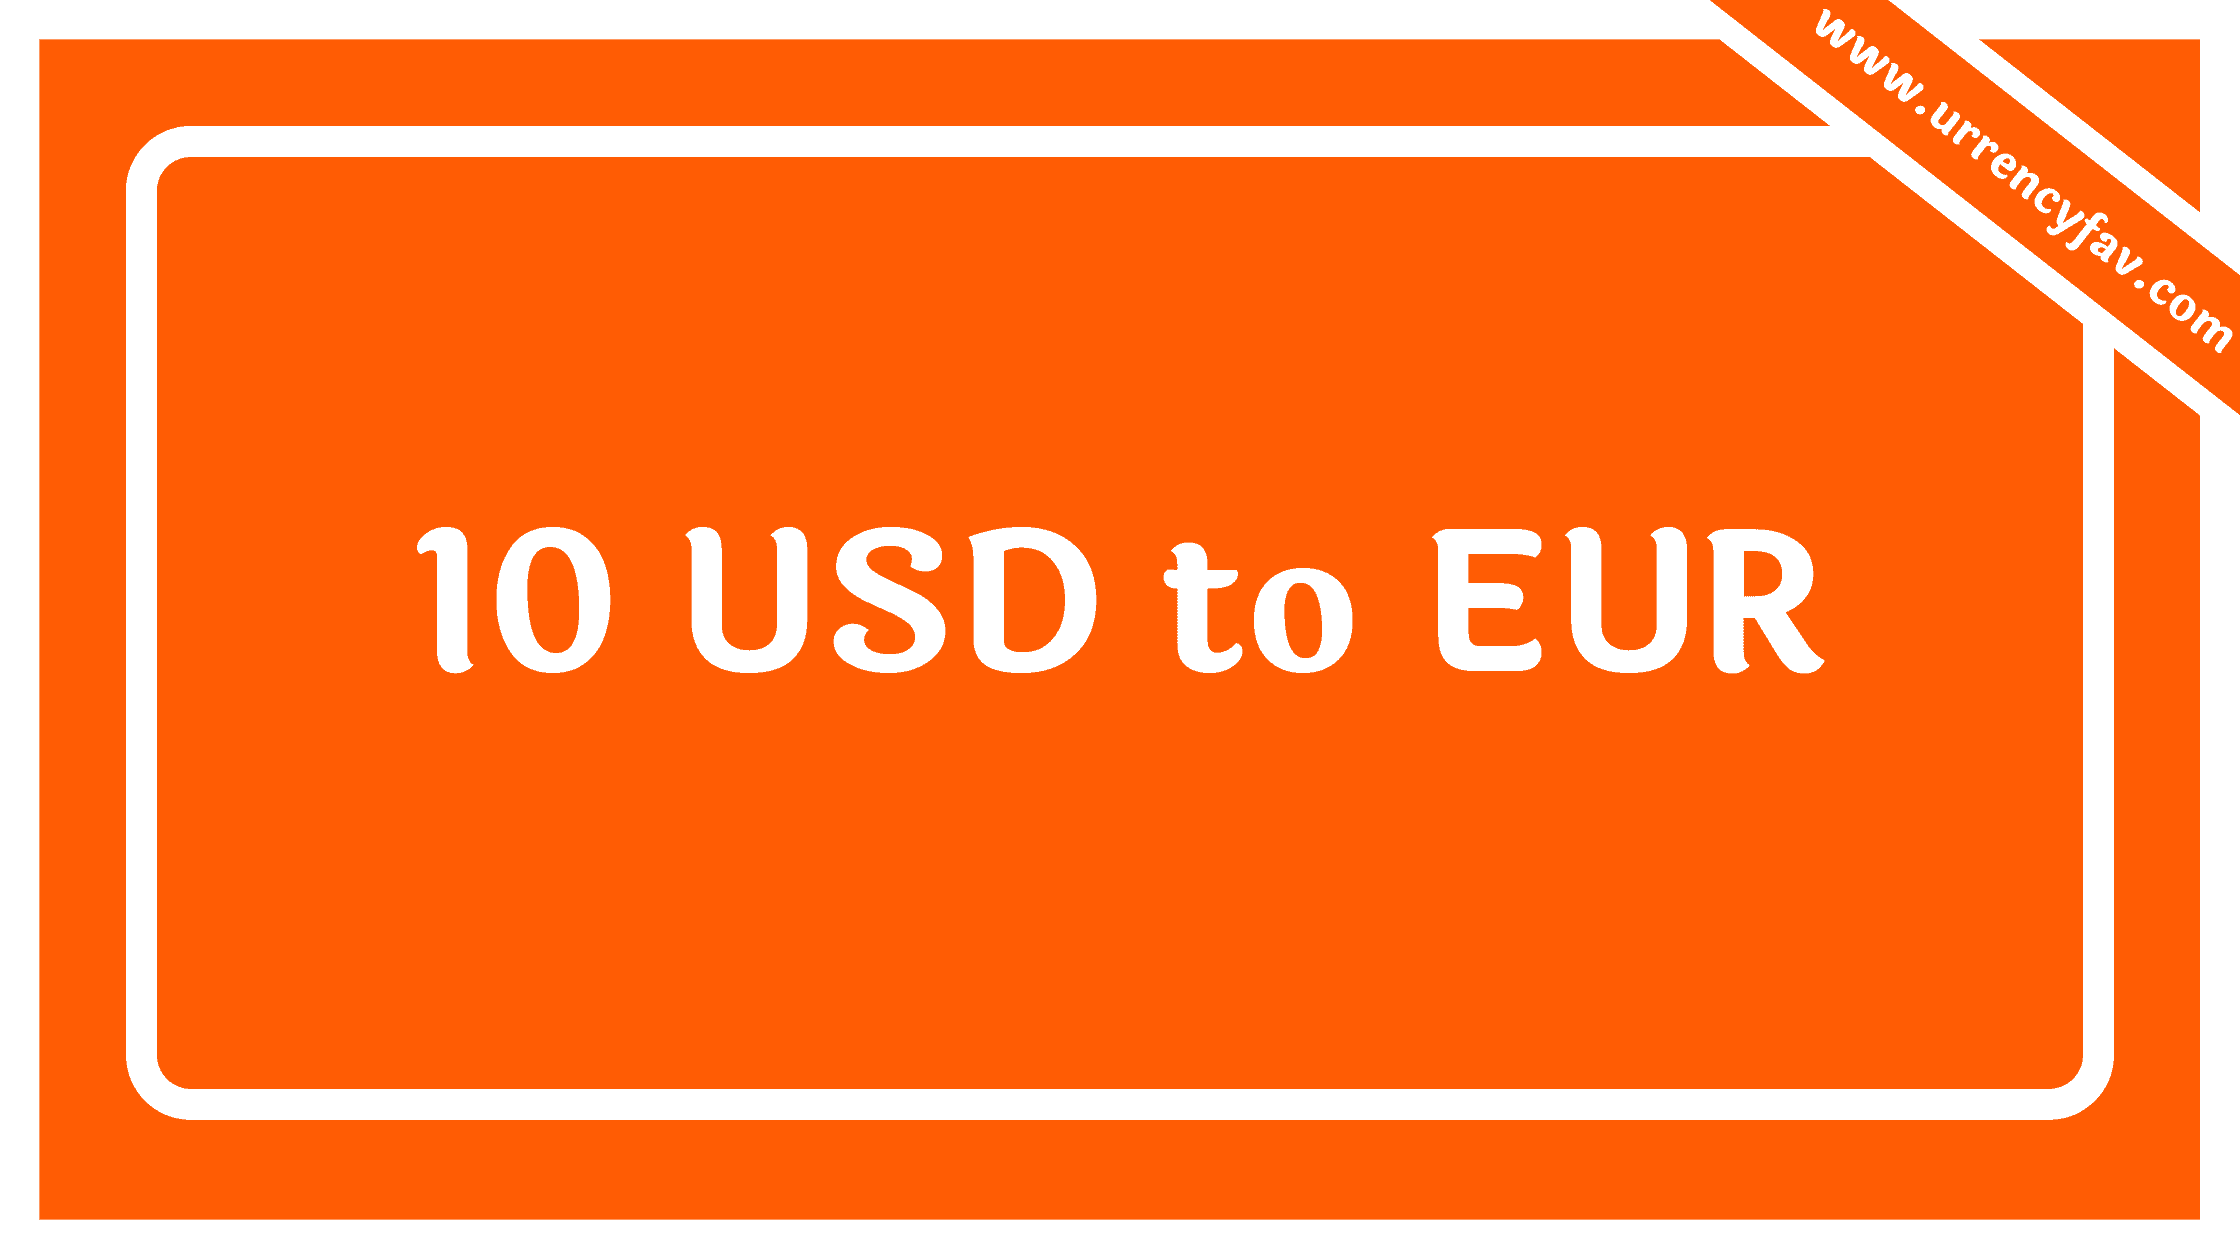 10 USD to EUR